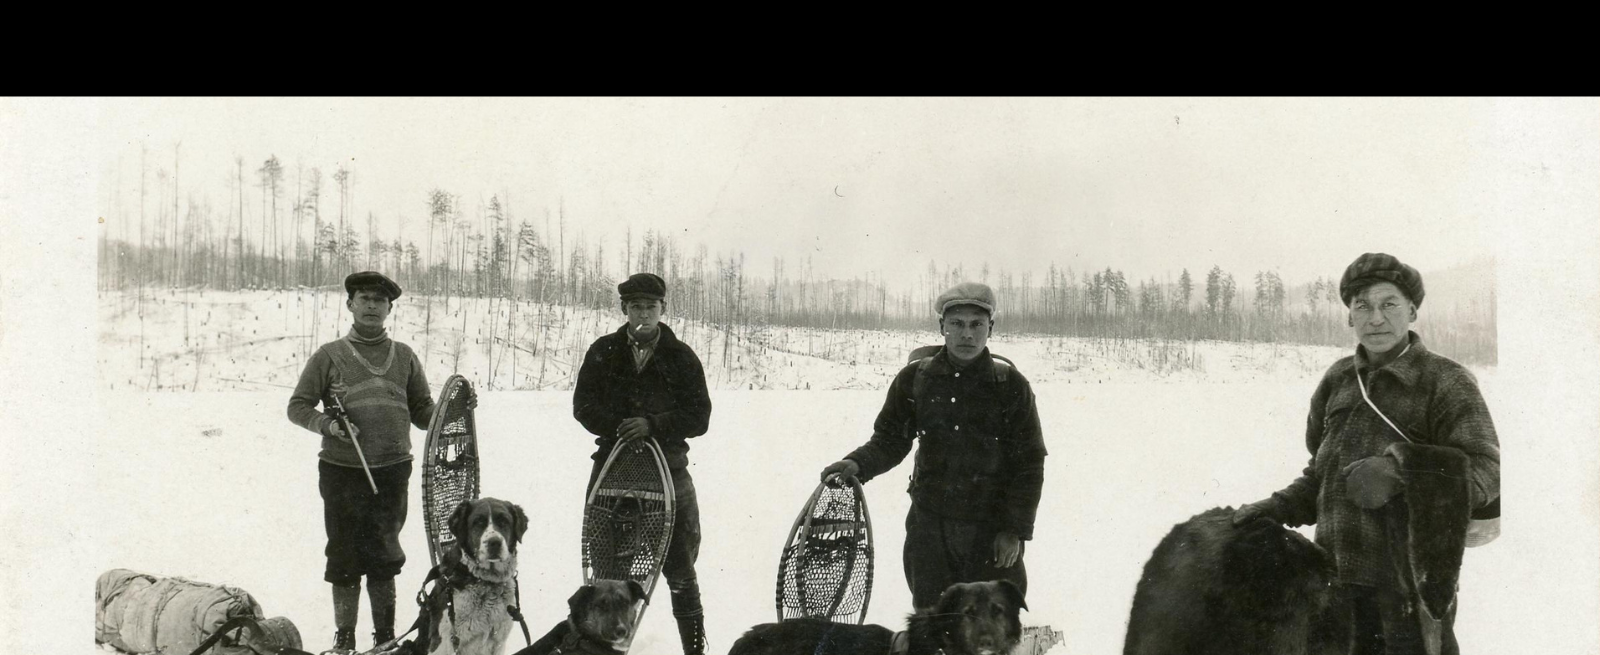 Four fur traders standing in snow covered landscape with snowshoes and team of dogs